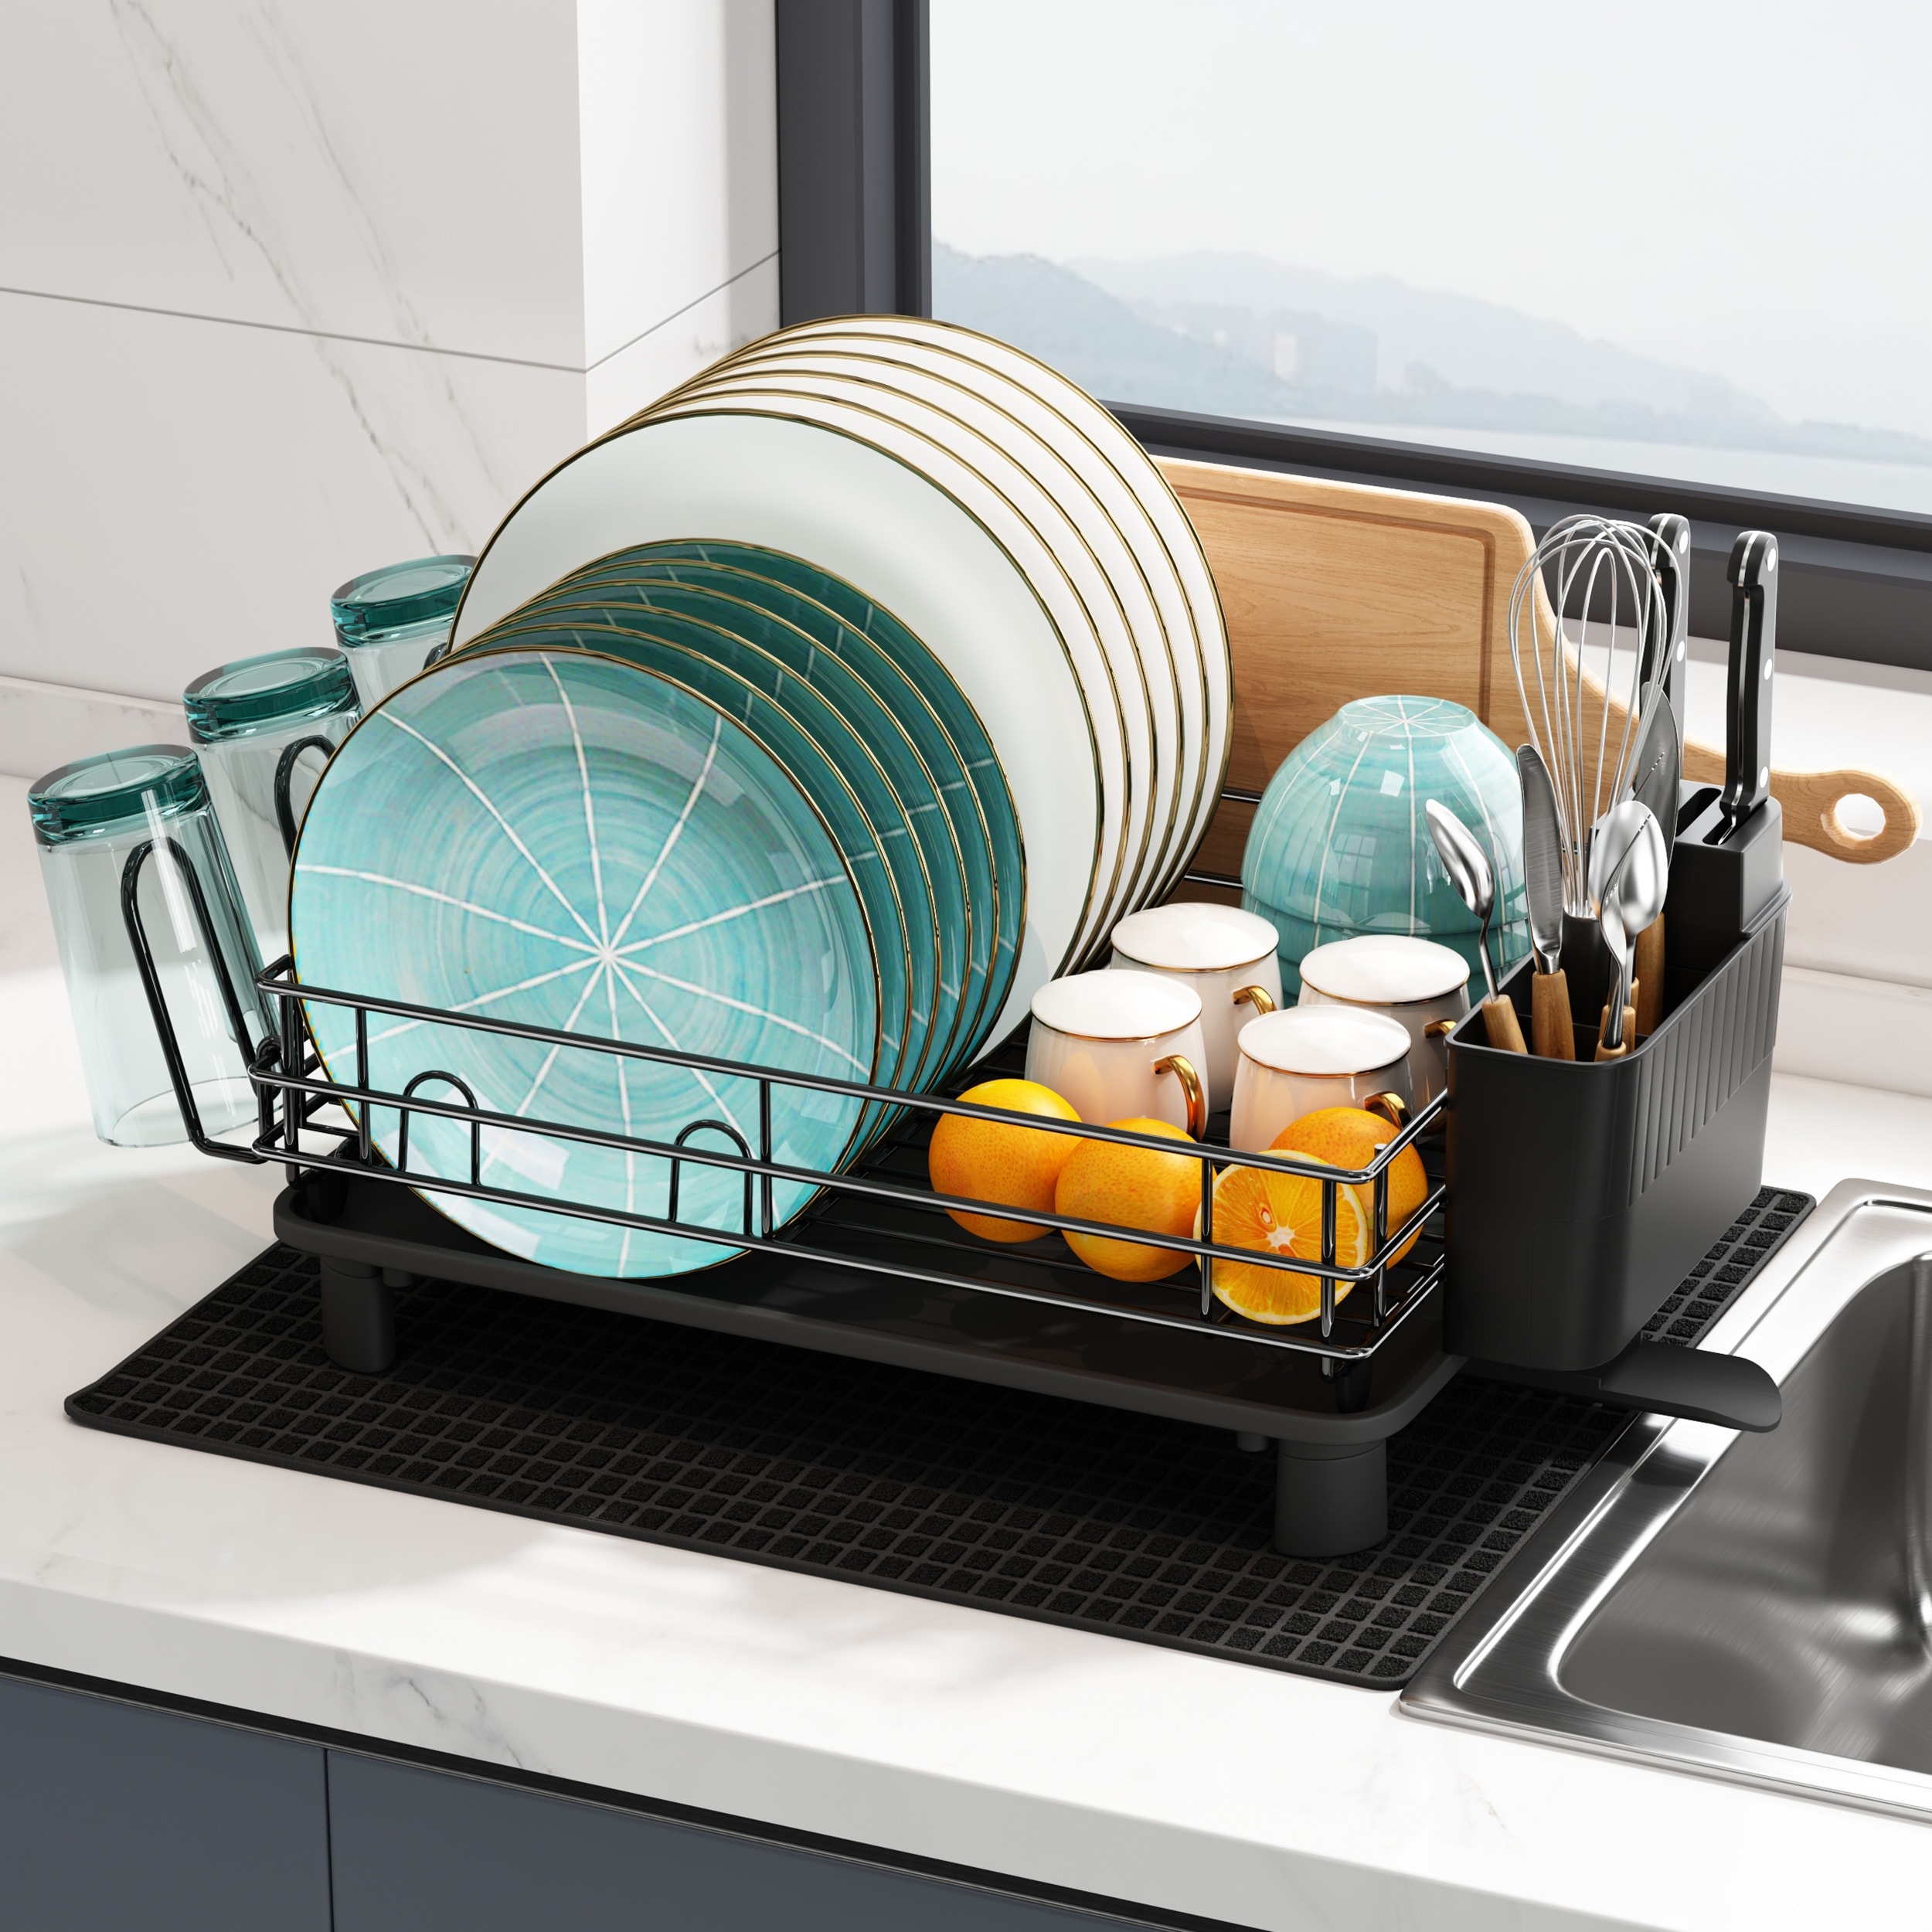 https://ak1.ostkcdn.com/images/products/is/images/direct/31a786846a9cc14a2e59abced08dd58c3e65b046/JASIWAY-Multifunctional-Kitchen-Stainless-Steel-Dish-Rack.jpg